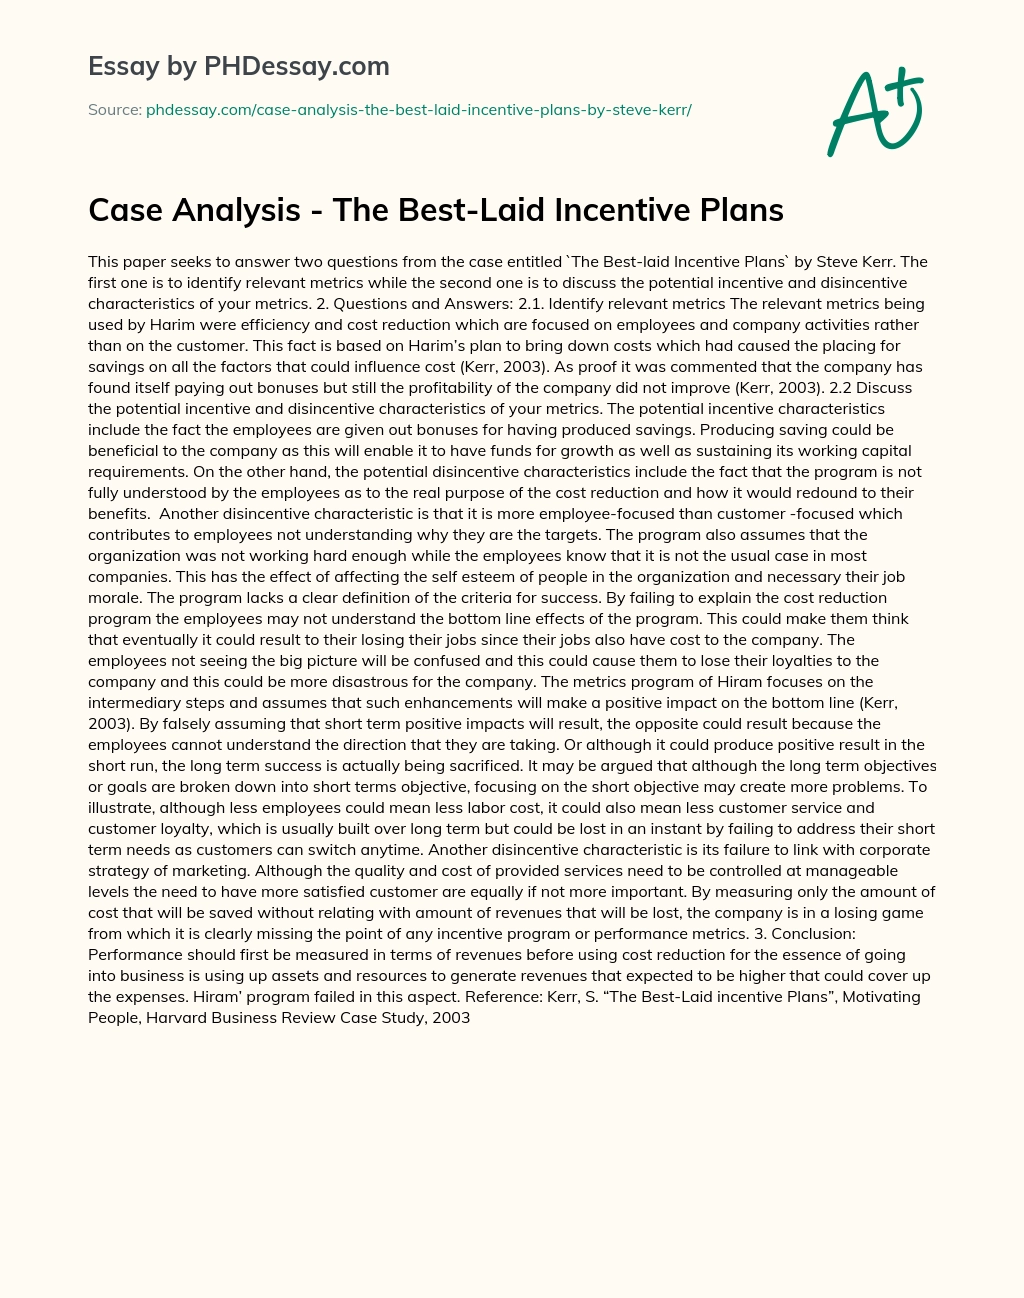 Case Analysis – The Best-Laid Incentive Plans essay